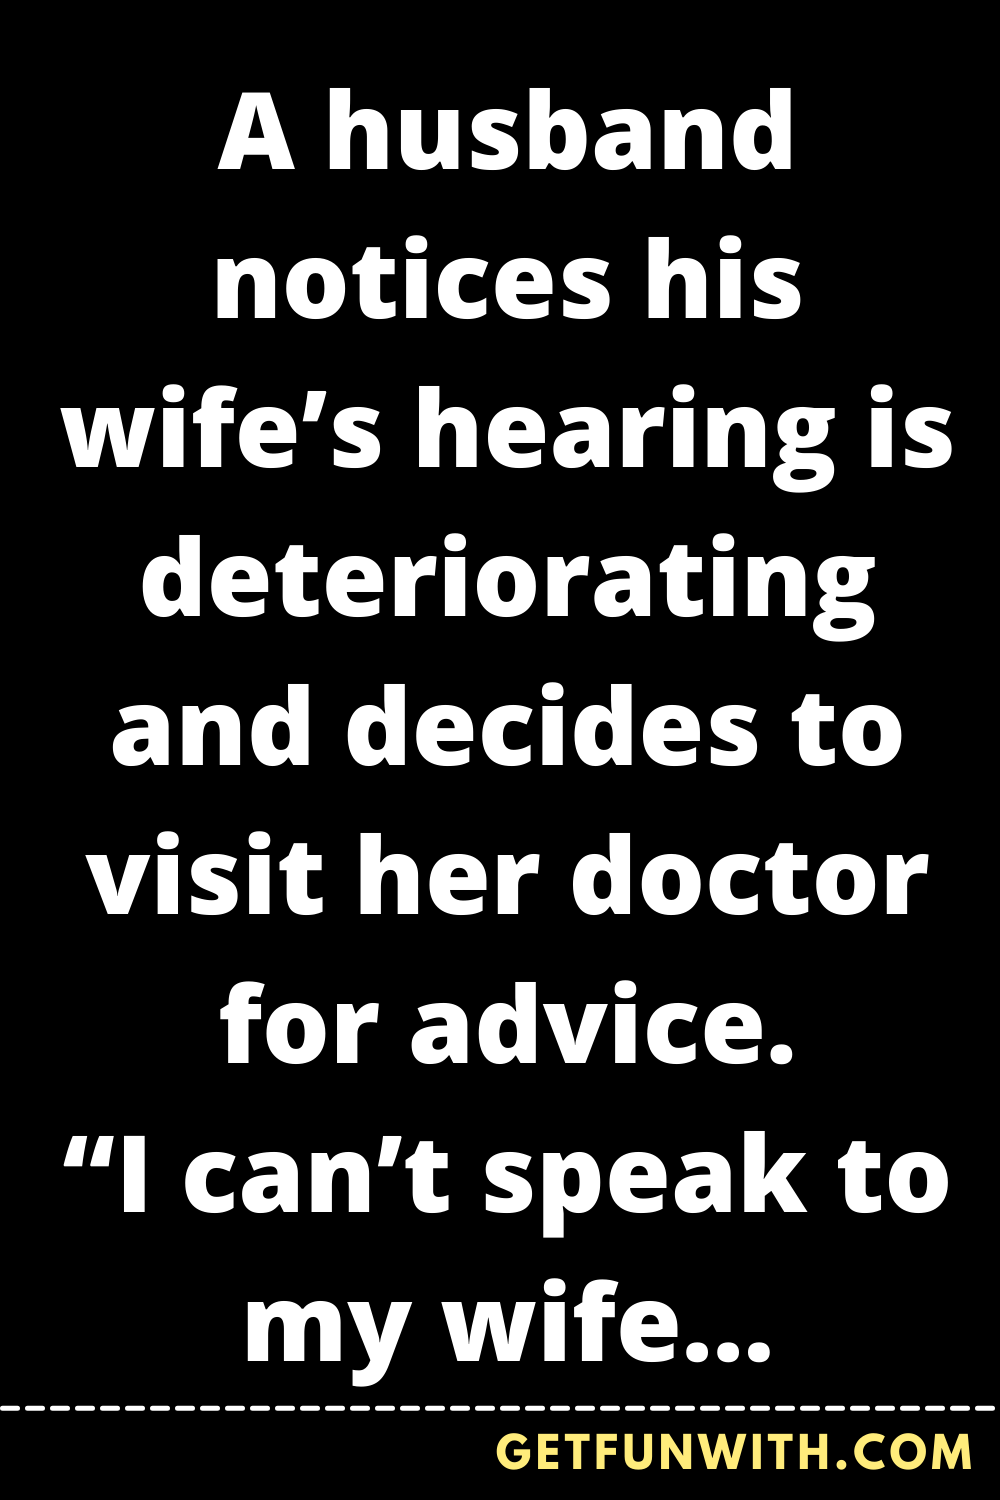 A husband notices his wife’s hearing is deteriorating and decides to visit her doctor for advice.